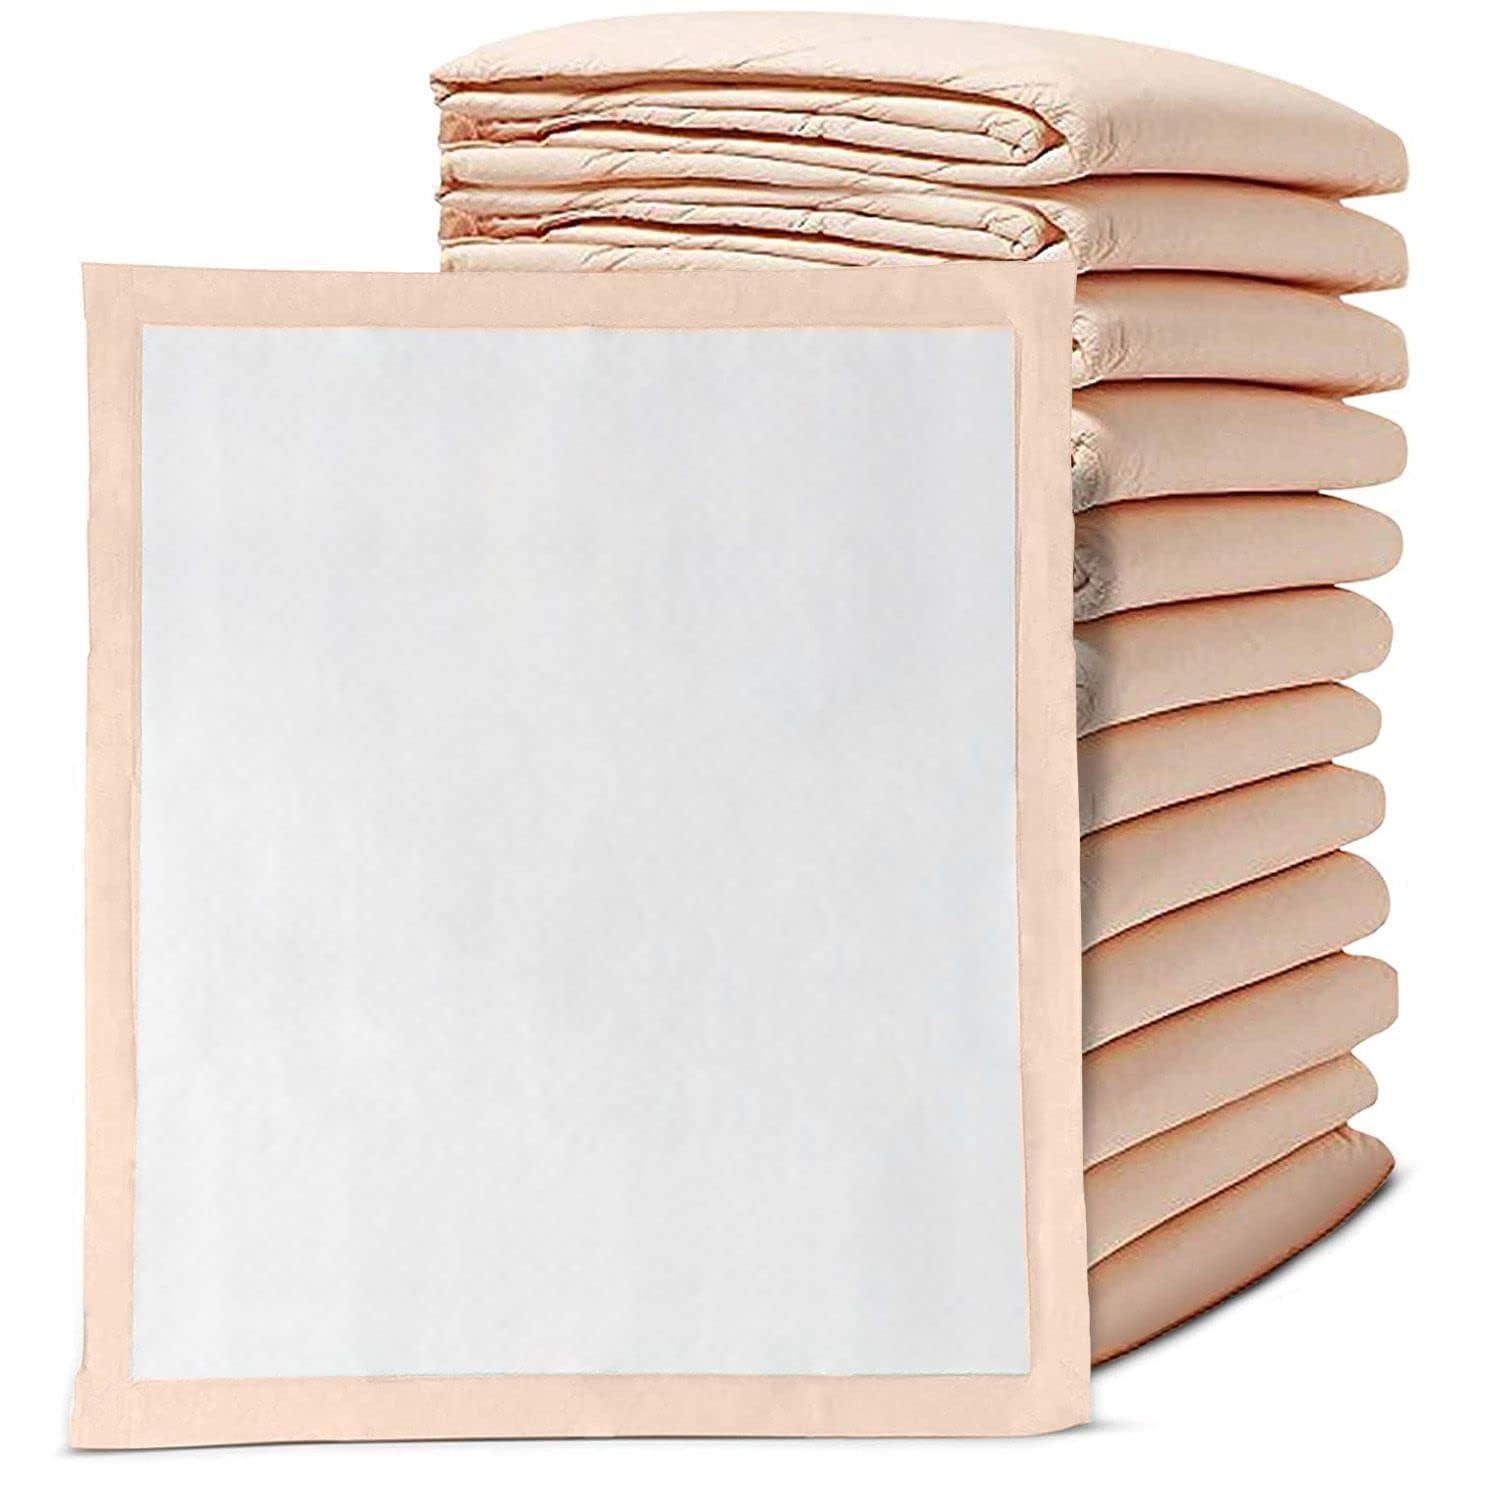 Premium Disposable Chucks Underpads, 30" x 36" - Highly Absorbent Bed Pads for Incontinence and Senior Care - Peach Color - Leak Proof Protection